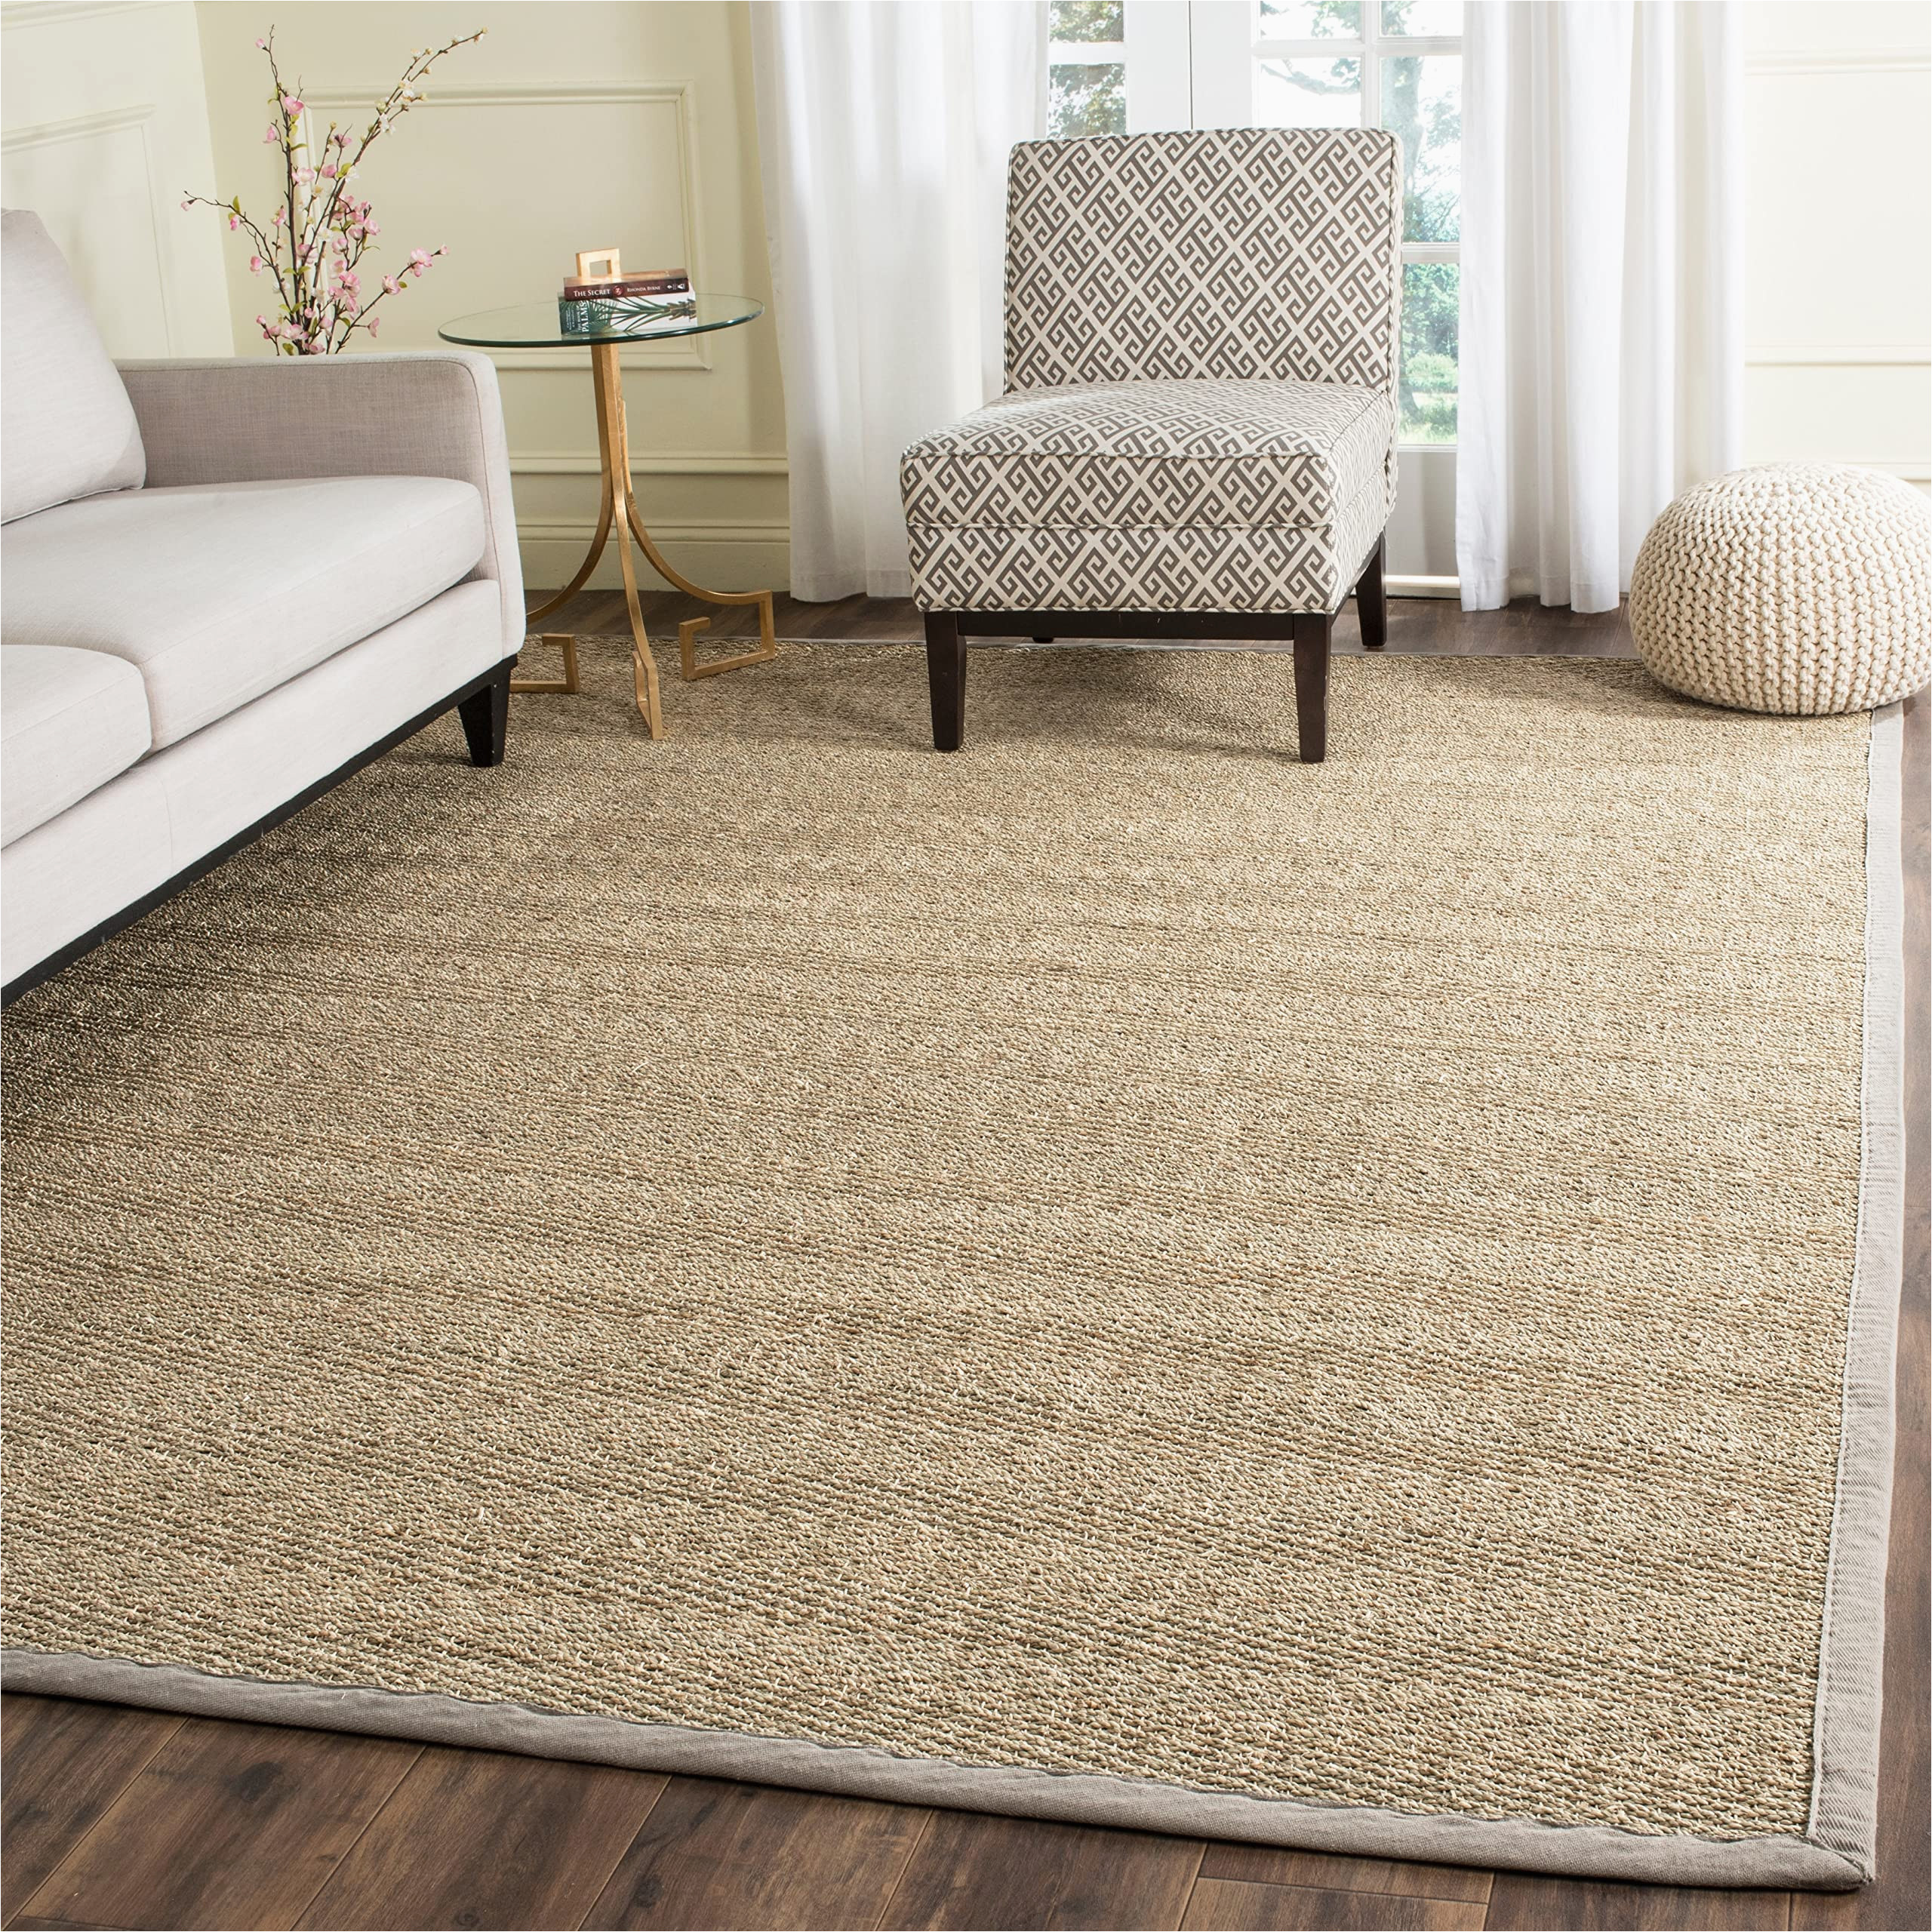 9 by 12 area Rugs for Sale Safavieh Natural Fiber Collection 9′ X 12′ Grey Nf115p Border Herringbone Seagrass area Rug